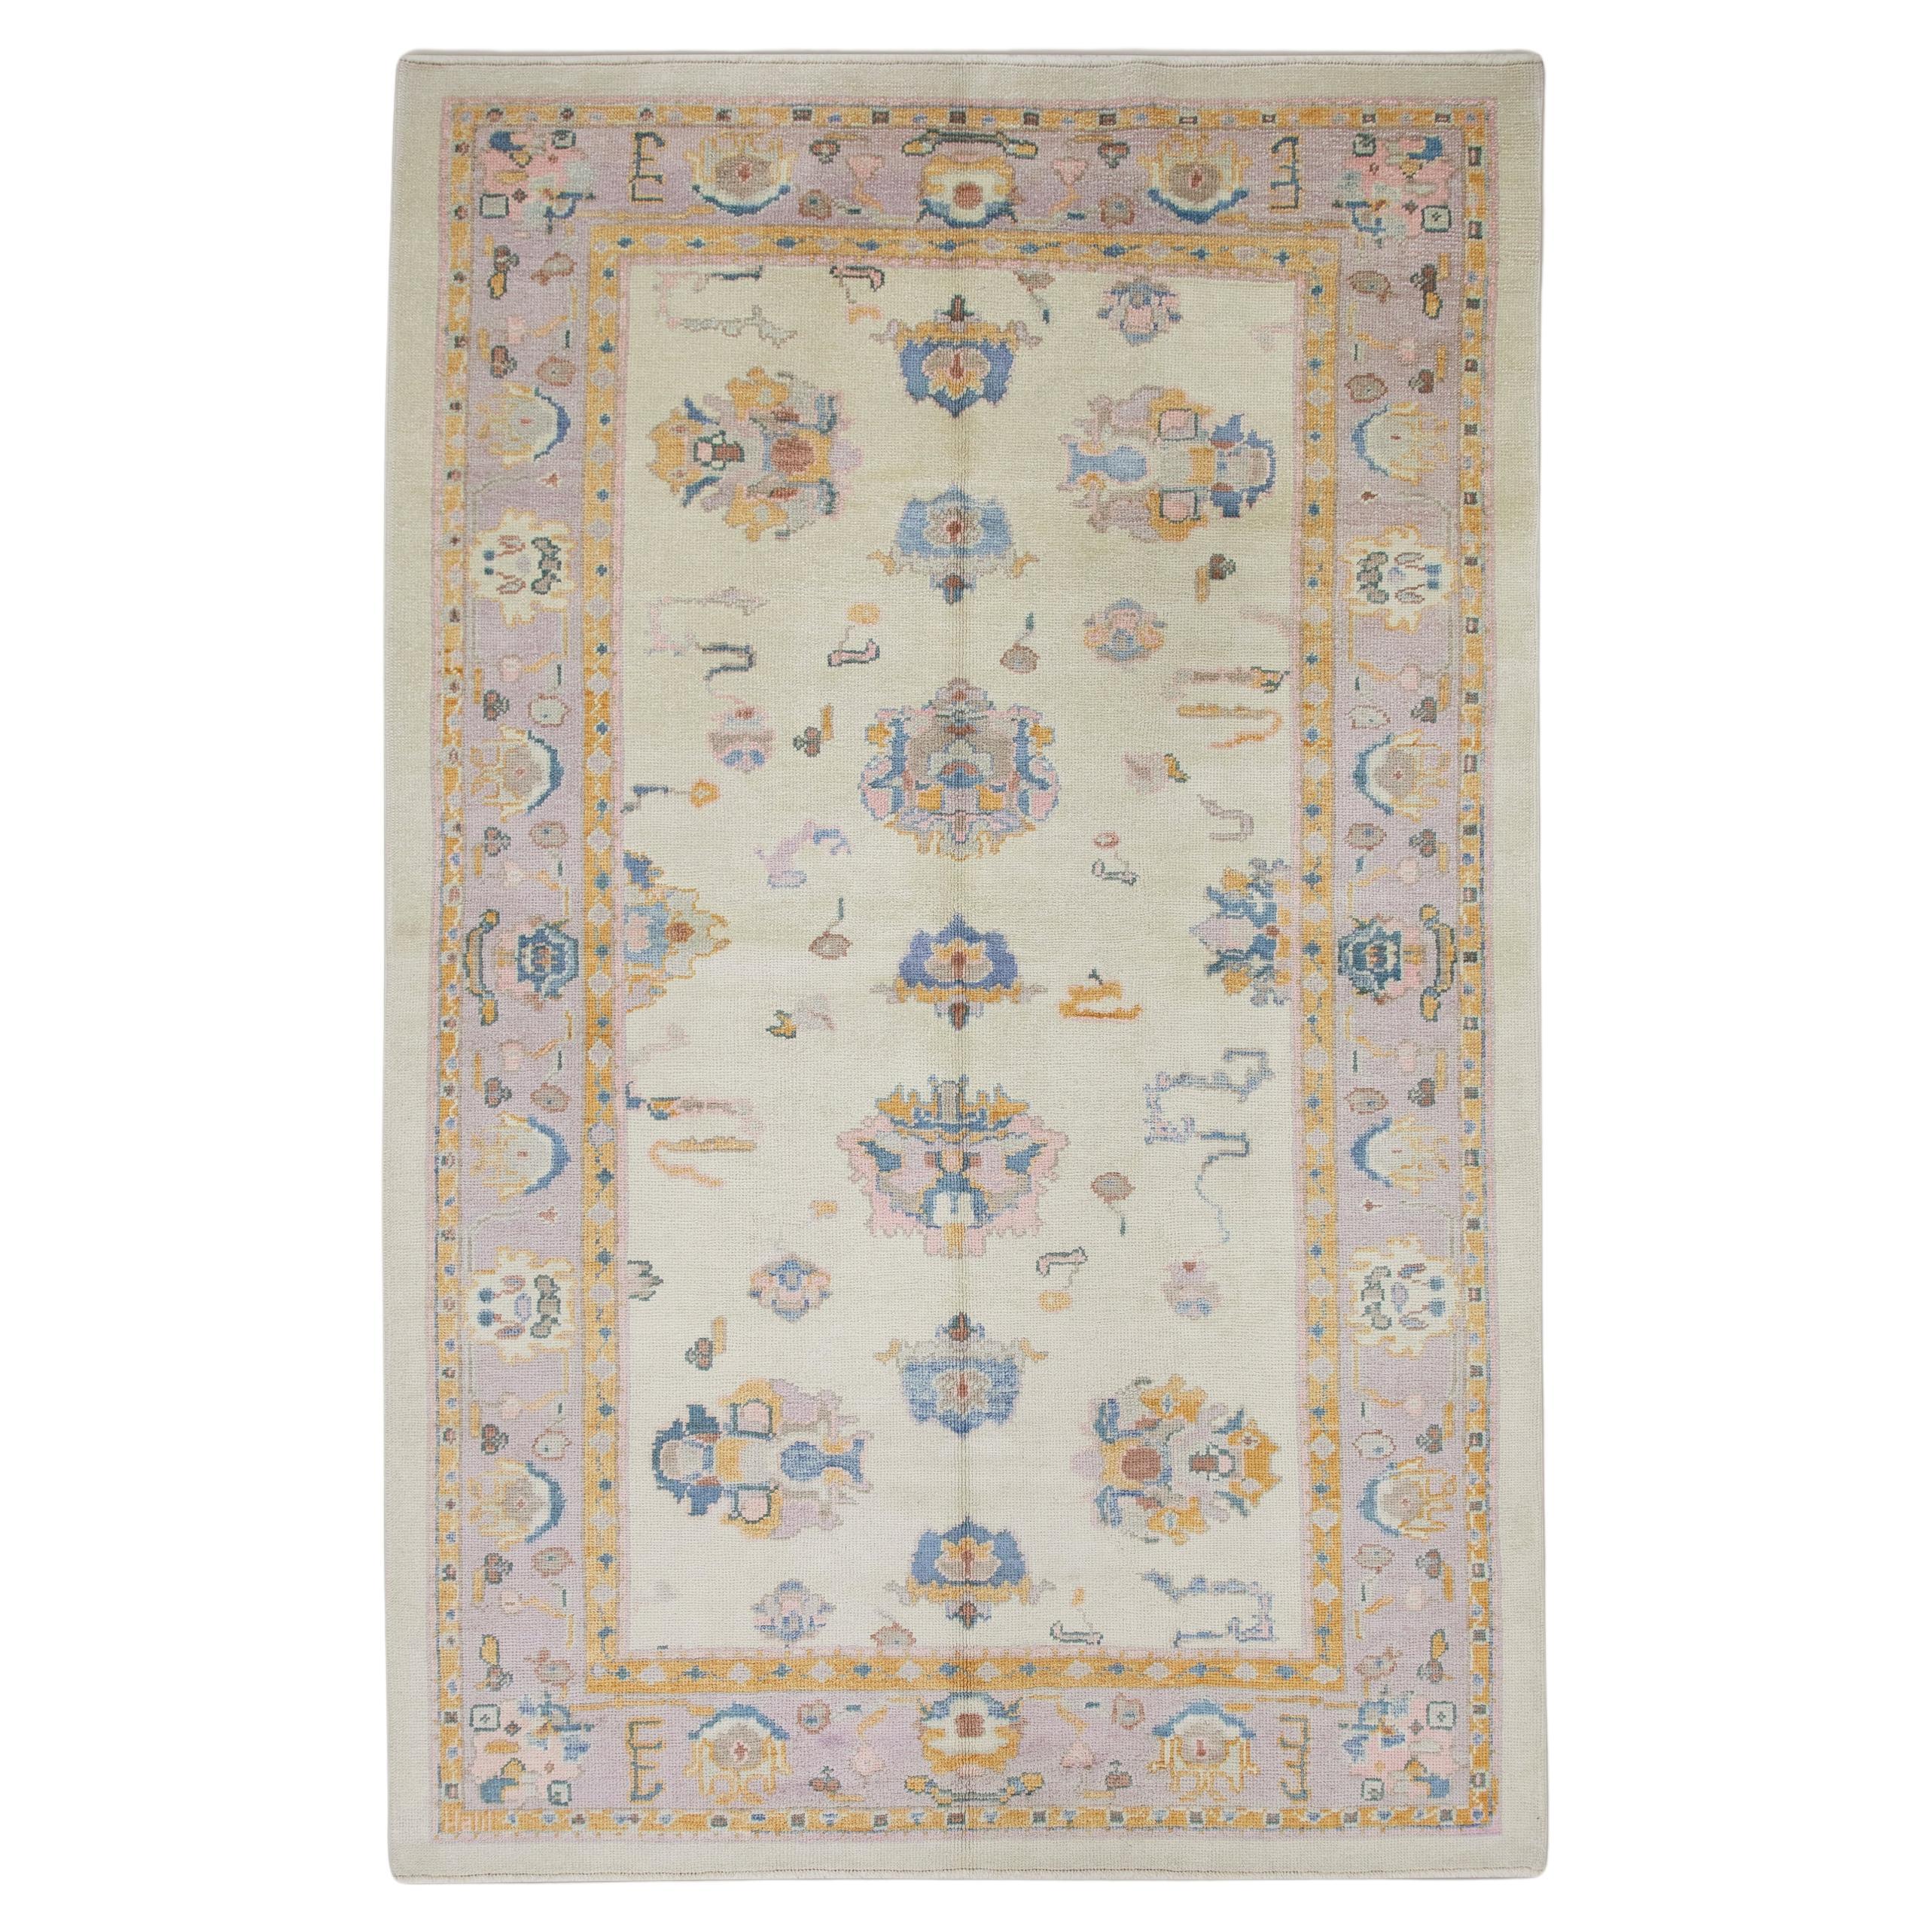 Lilac, Orange, and Blue Floral Handwoven Wool Turkish Oushak Rug 6'2" x 10' For Sale